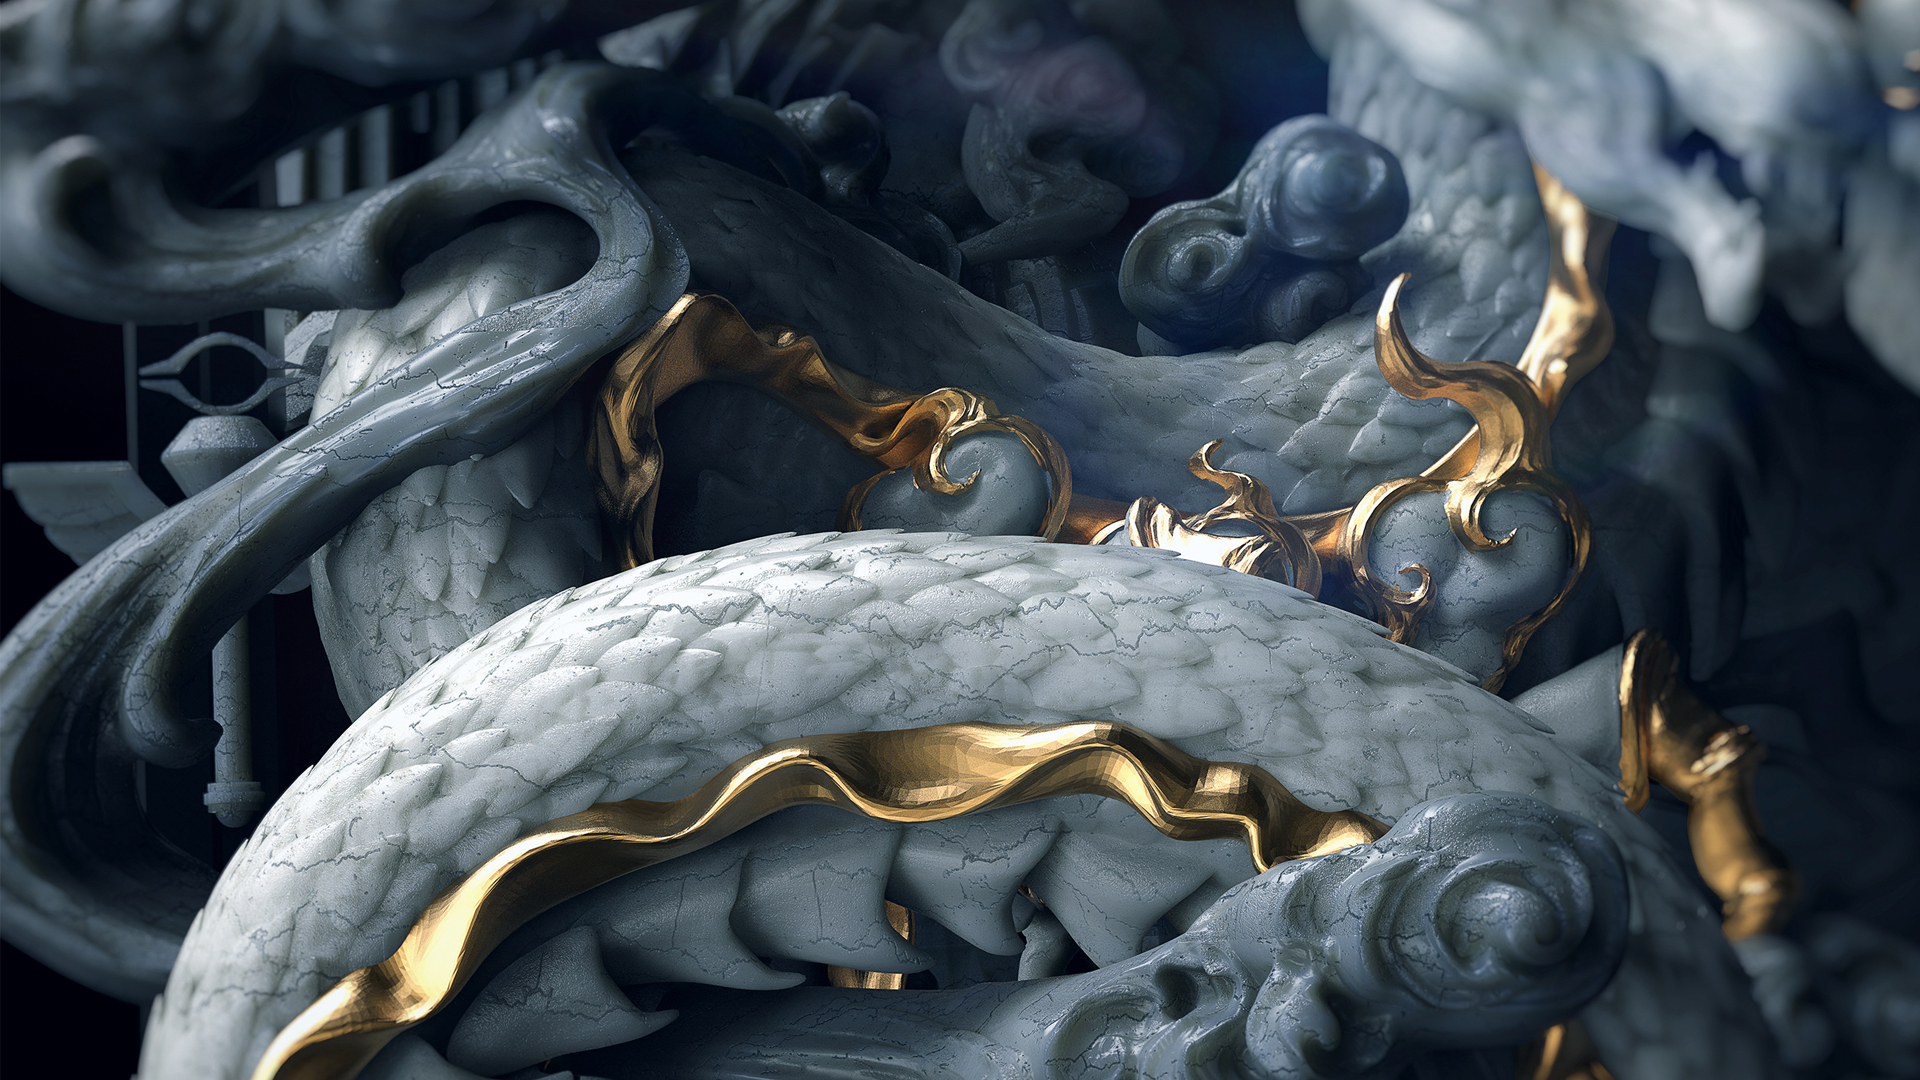 pc wallpaper 2017,dragon,fictional character,cg artwork,mythical creature,animation